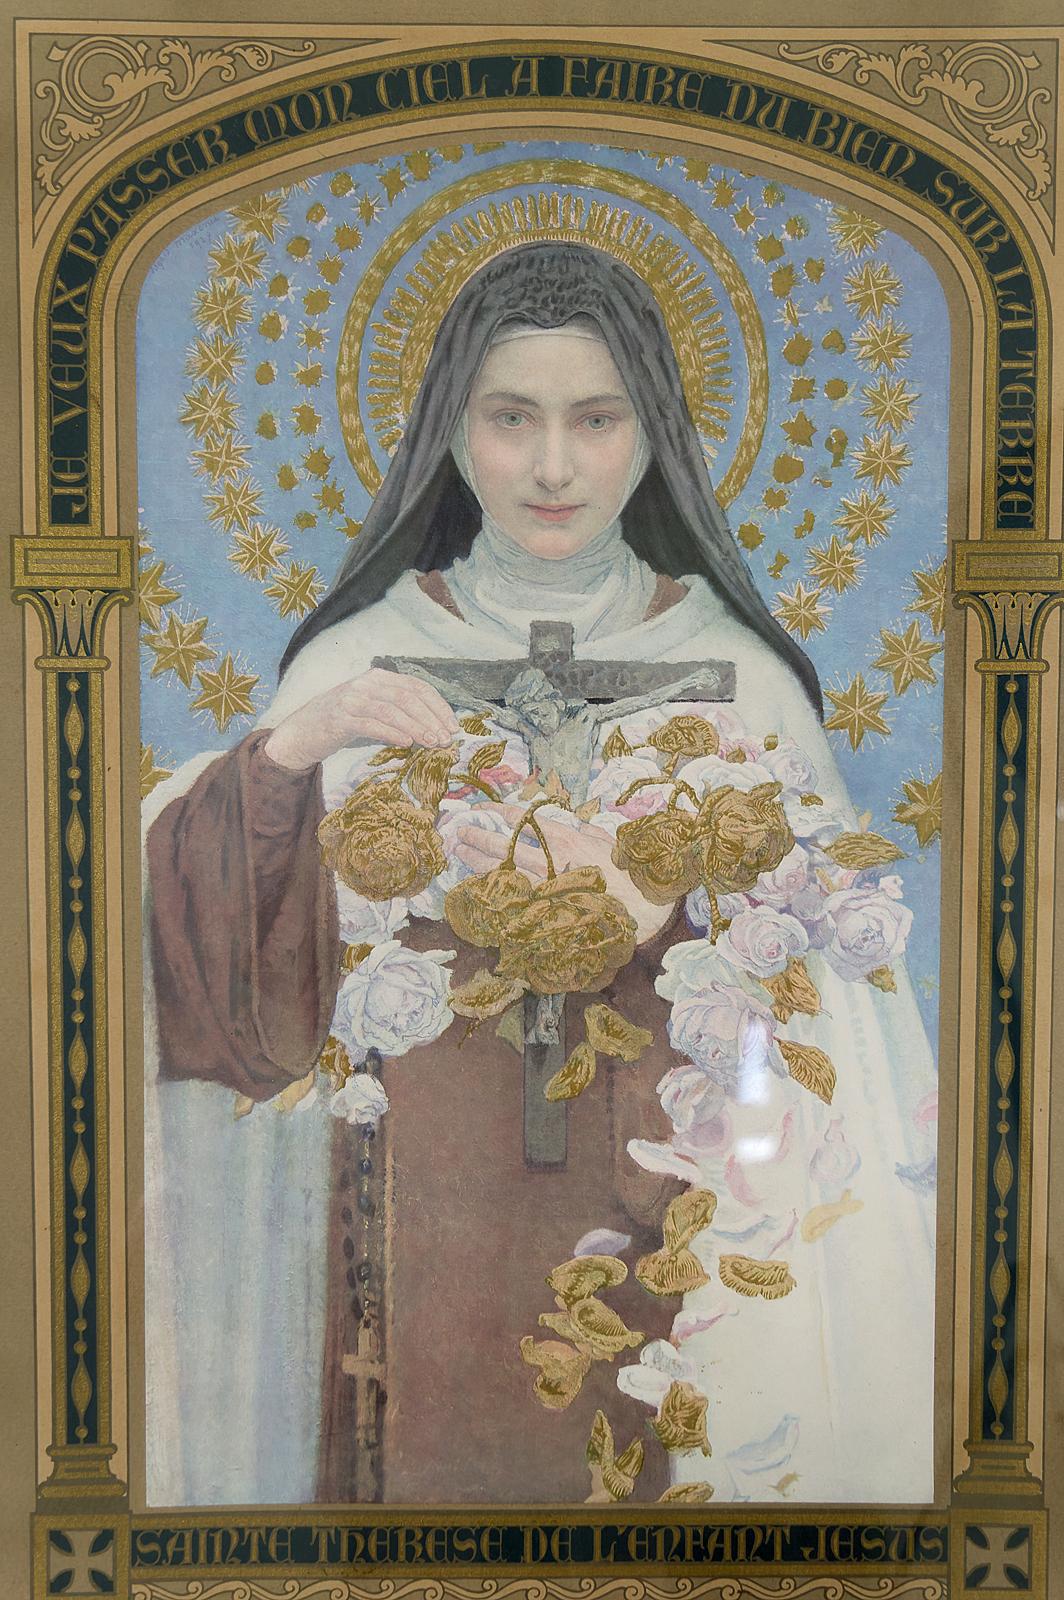 st therese de lisieux